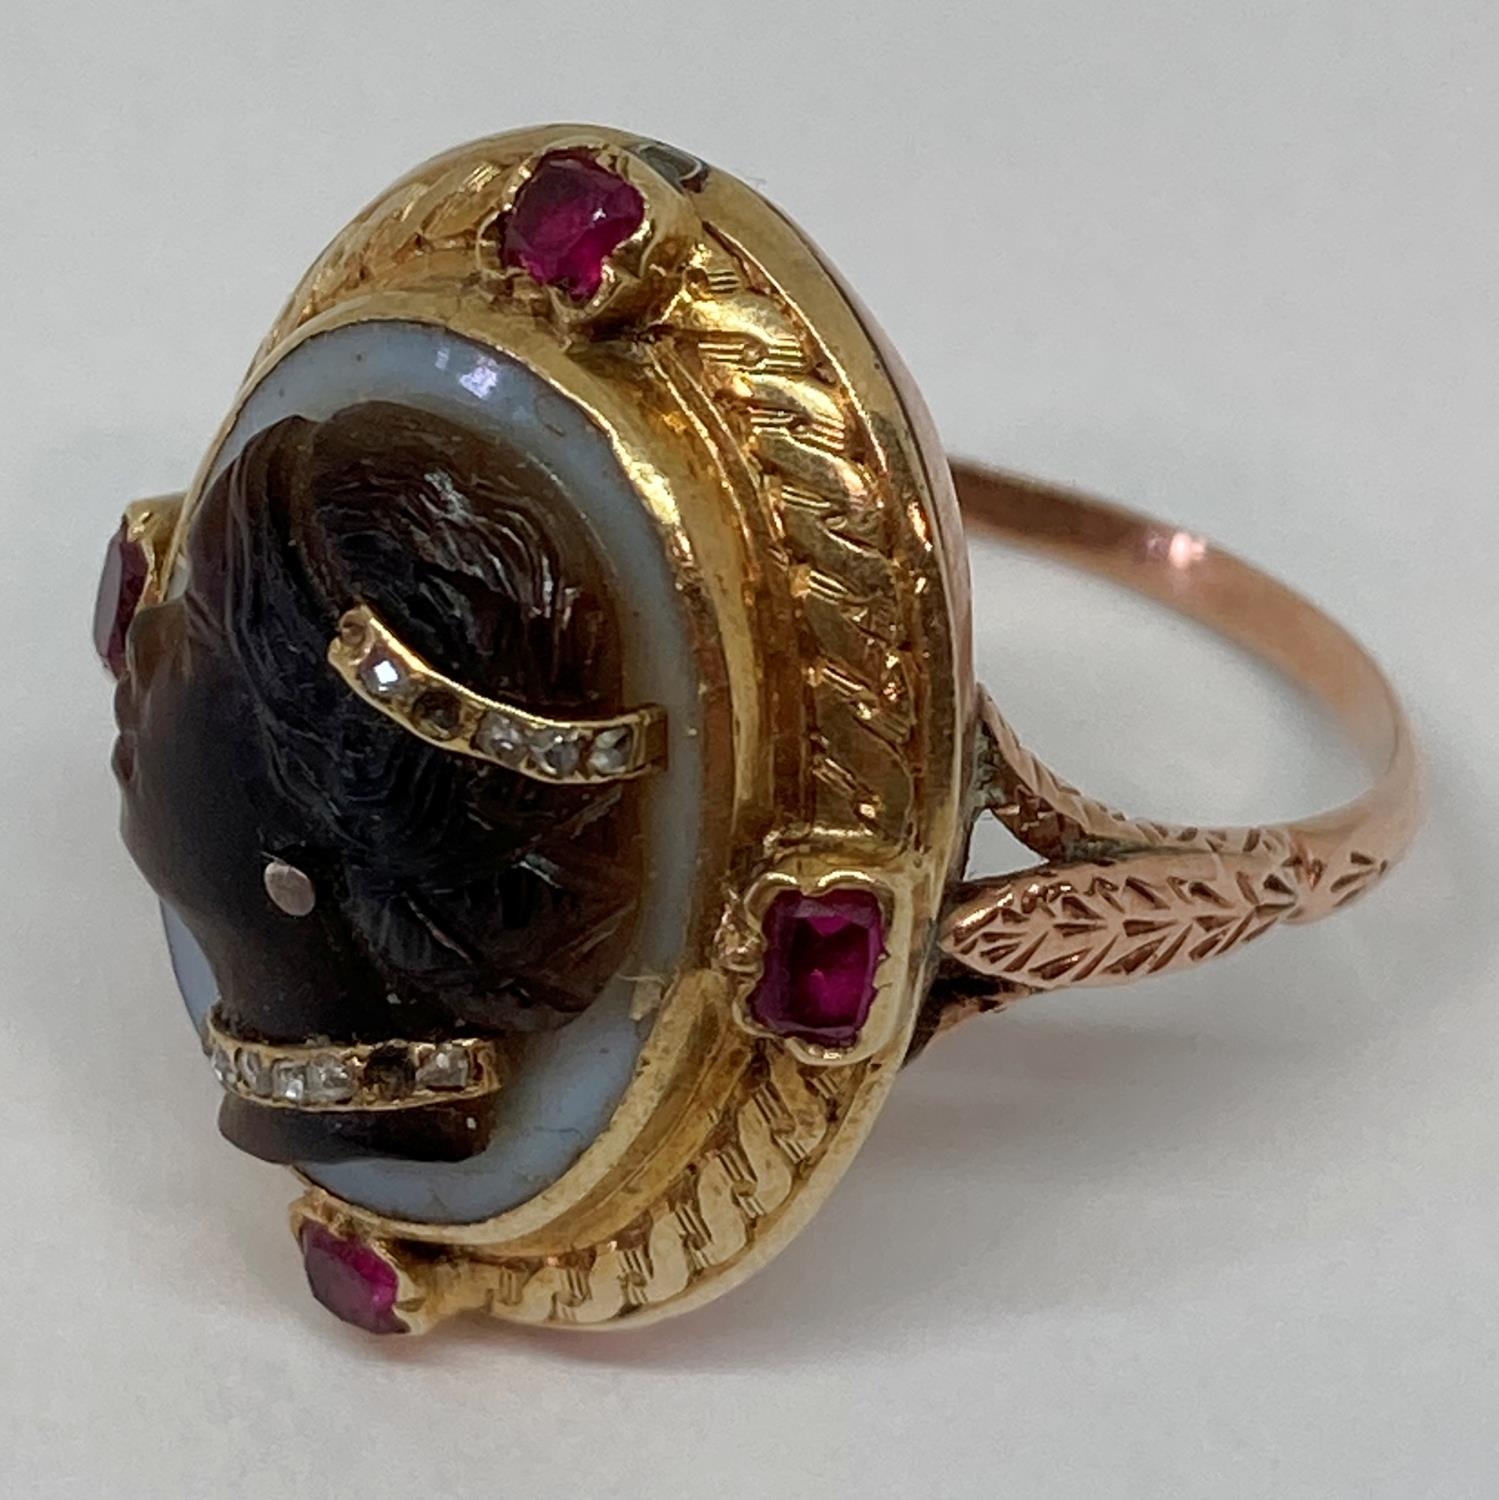 Fine antique blackamoor cameo ring depicting a lady, the agate cameo set with rose cut diamonds - Image 7 of 9